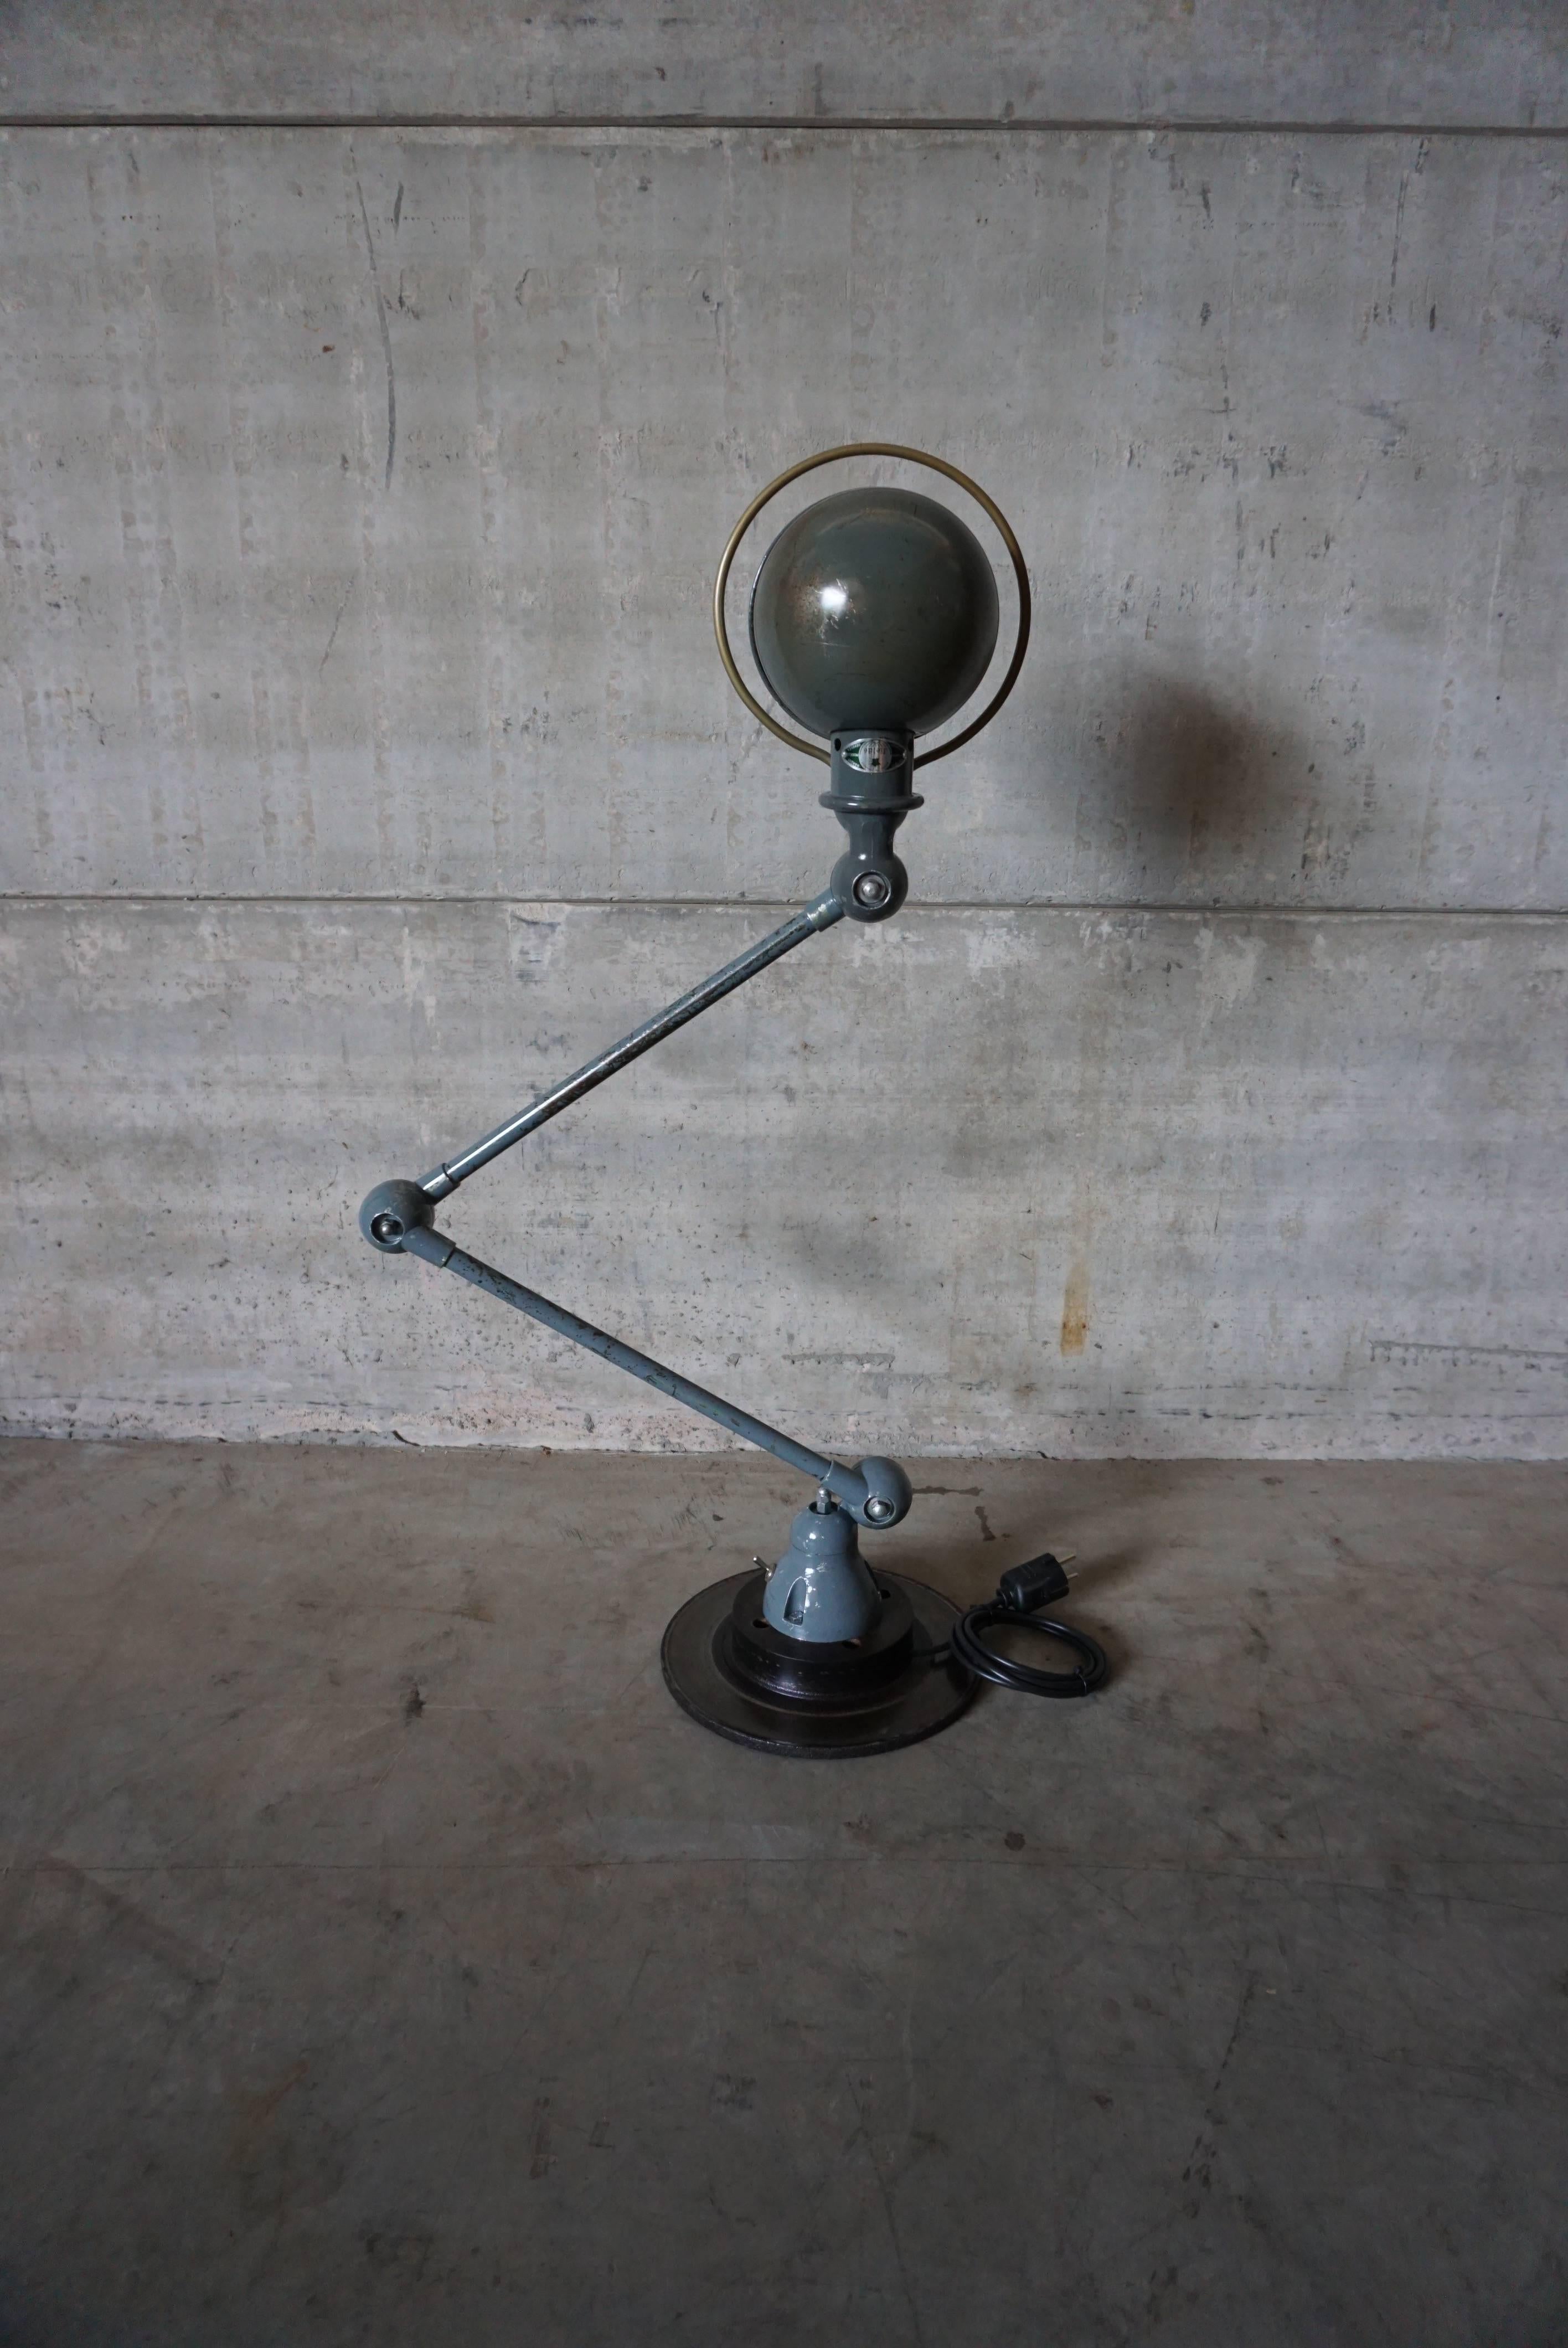 This Industrial lamp was manufactured by Jieldé in Lyon, France during the 1950s. The lamp is mounted on a clean brake disk. It features an articulated arm composed of two adjustable parts of 40 cm length each. The lamp has been fully restored, and